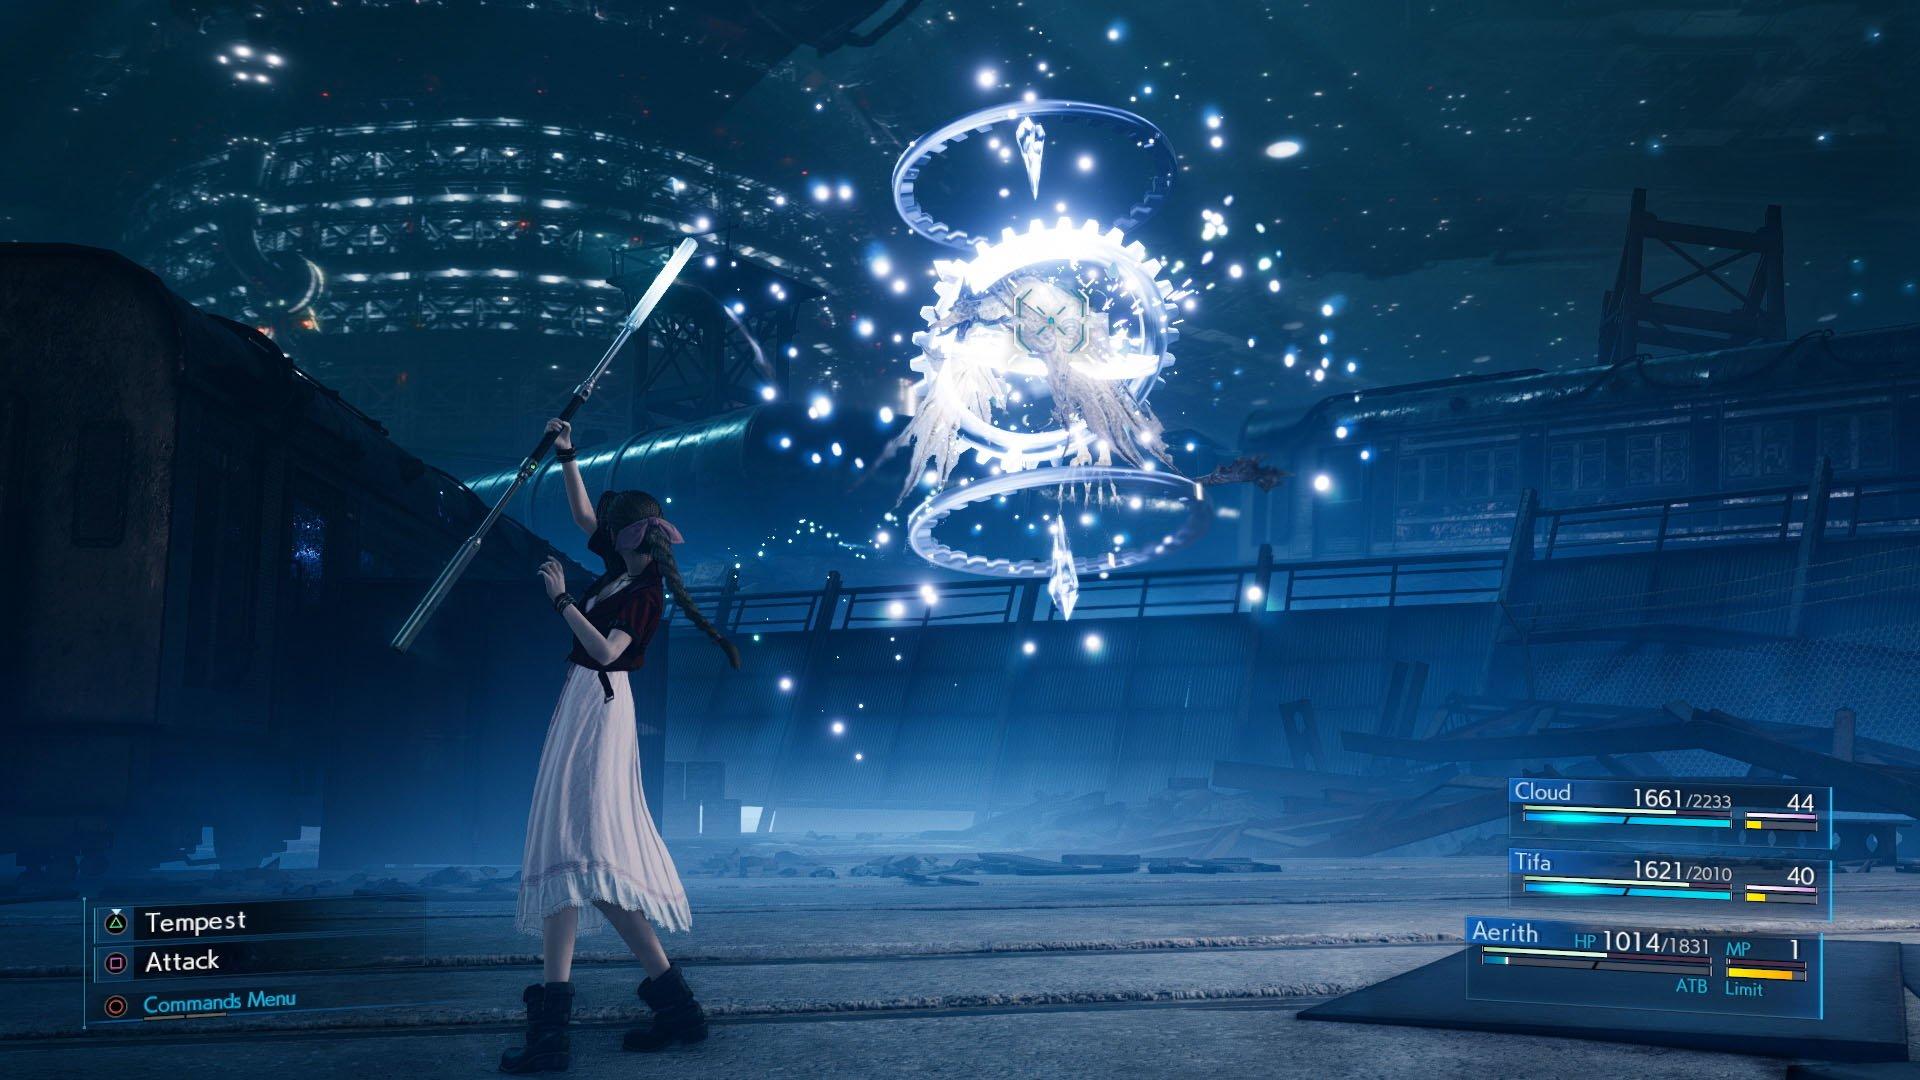 Final Fantasy VII Remake Coming to Xbox One, According to GameStop